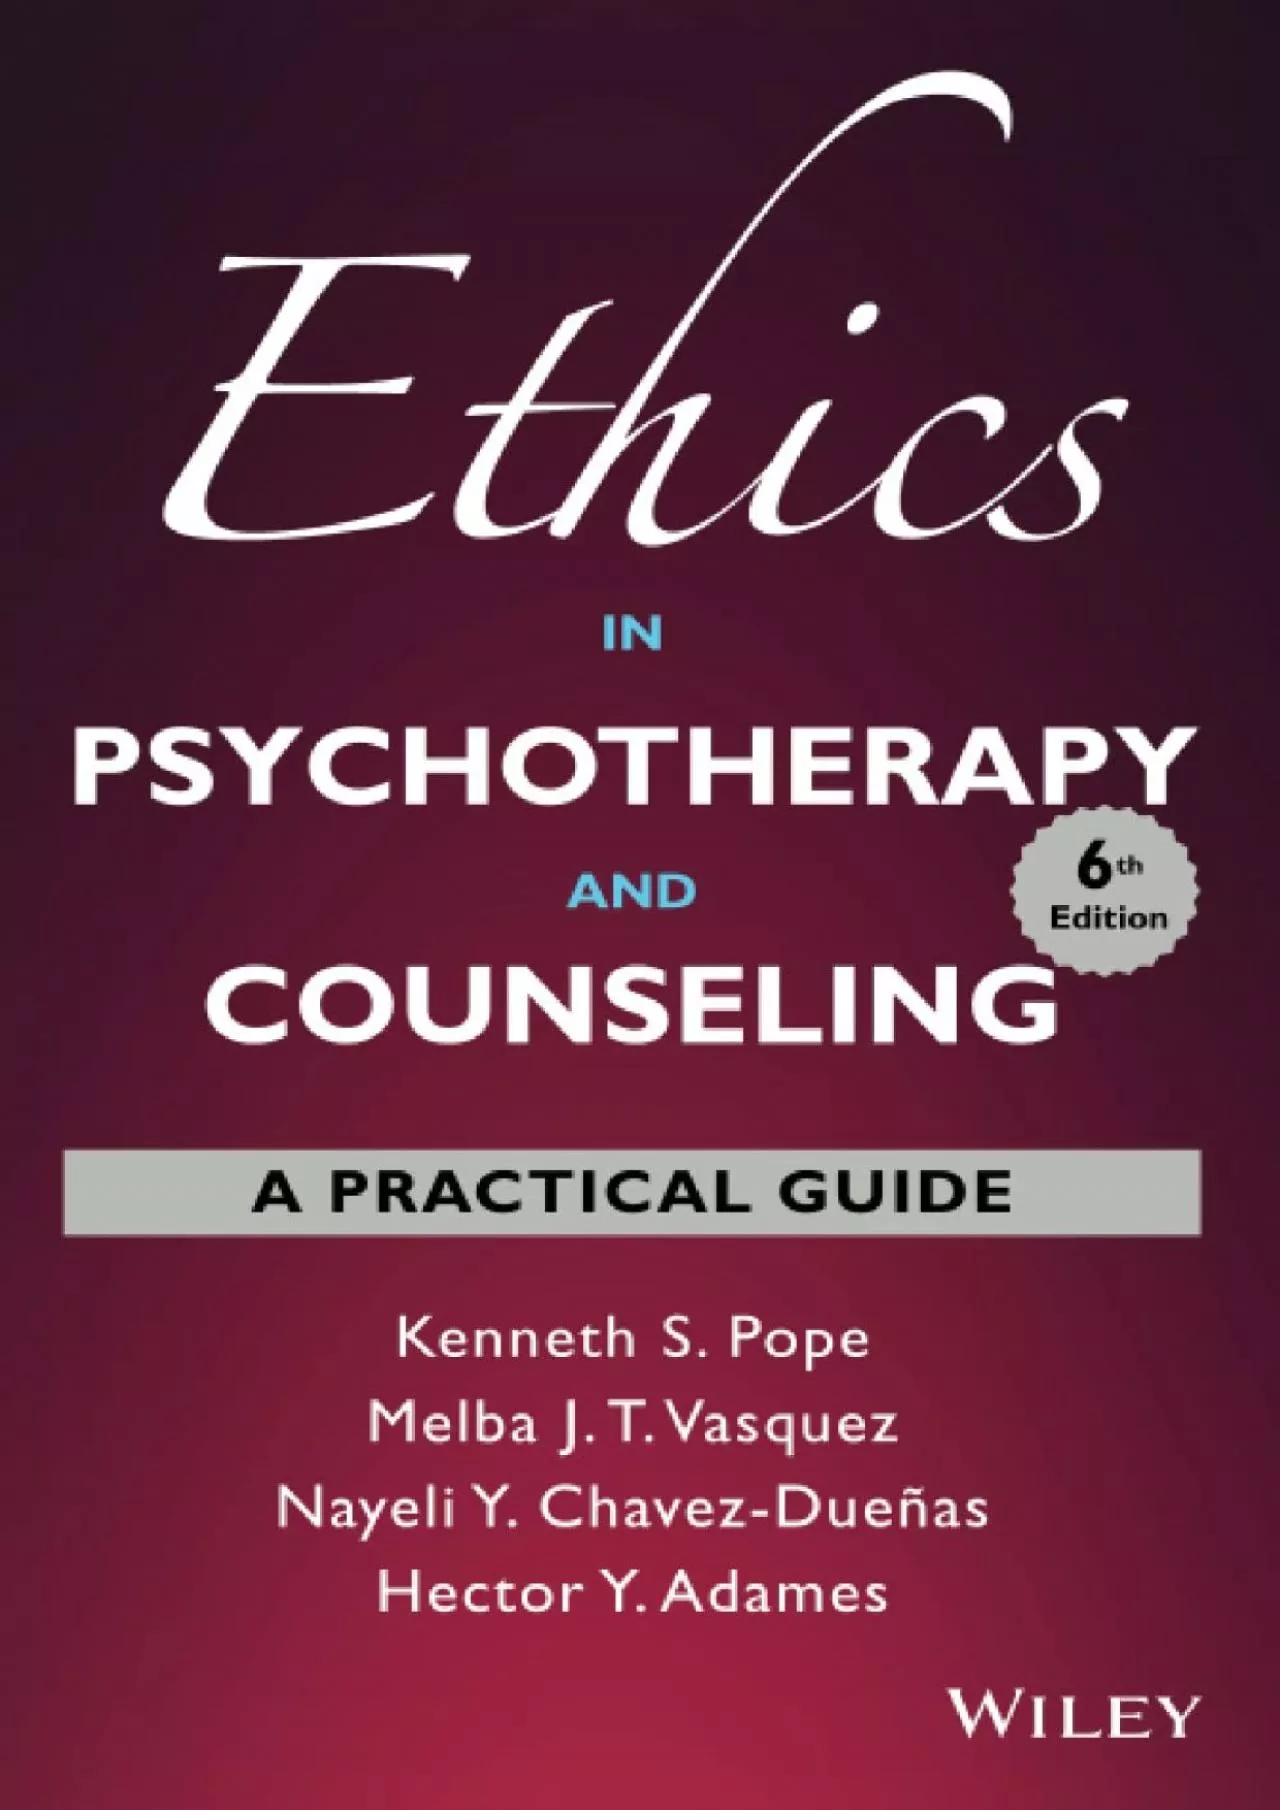 (READ)-Ethics in Psychotherapy and Counseling: A Practical Guide